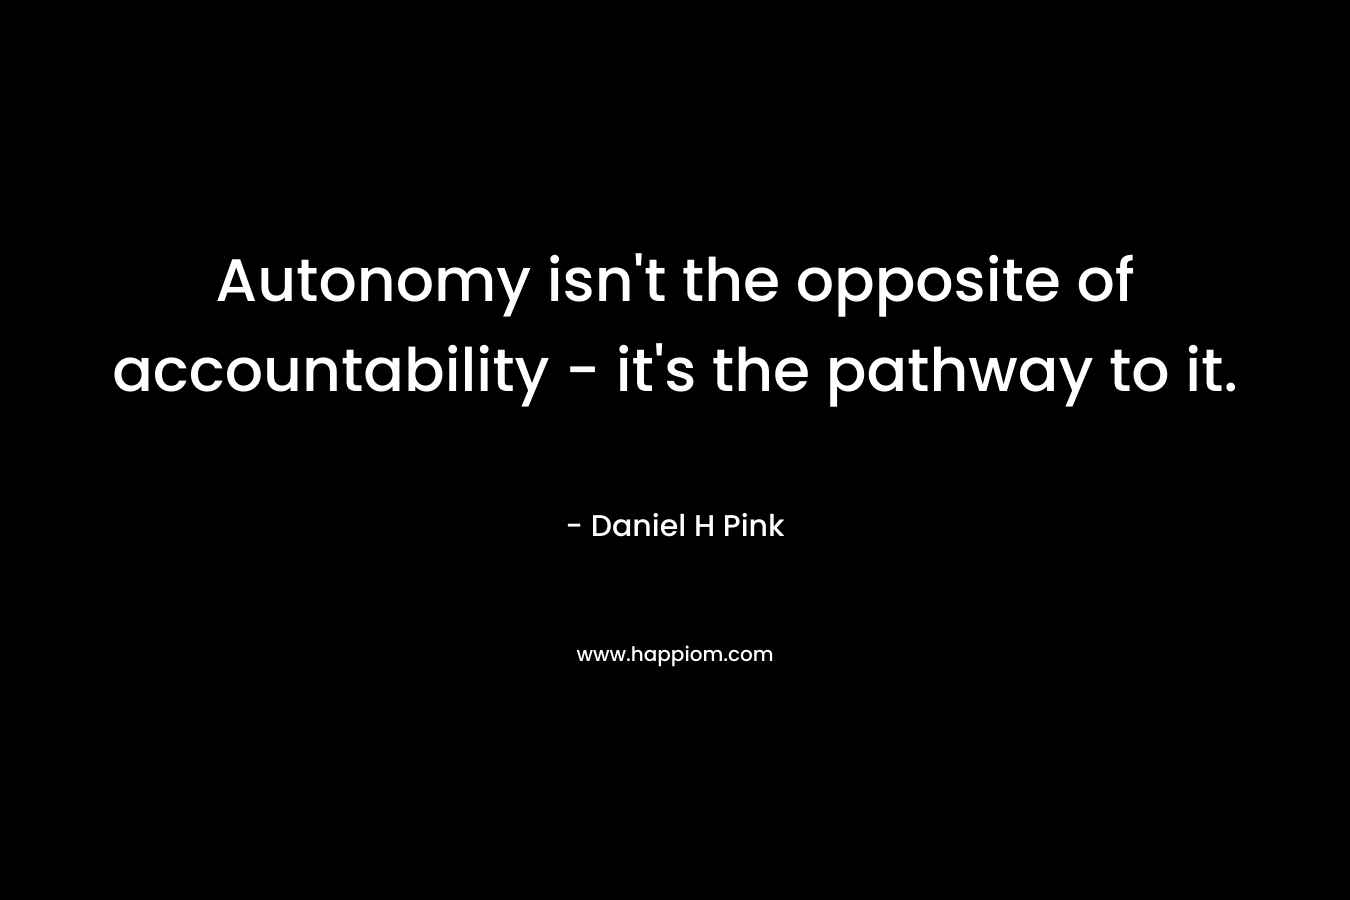 Autonomy isn't the opposite of accountability - it's the pathway to it.